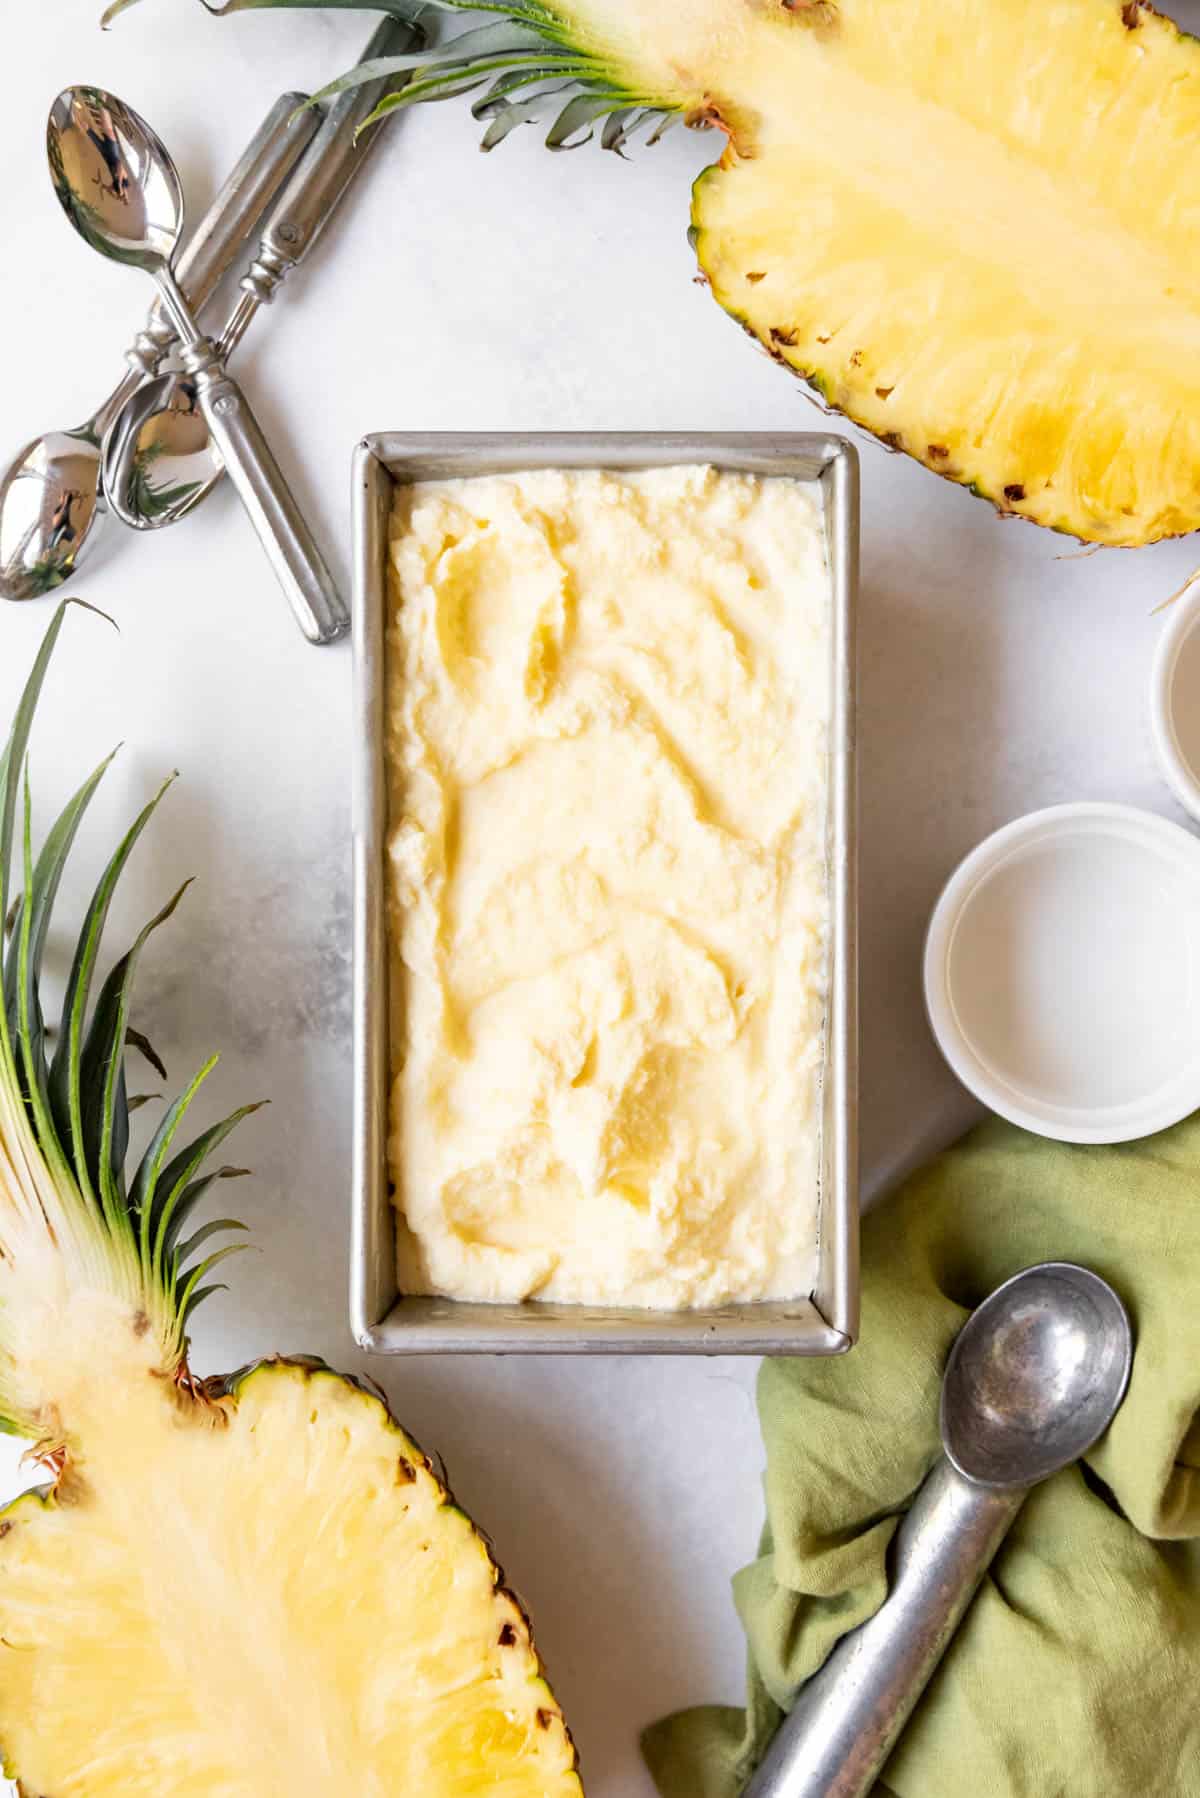 Homemade pineapple ice cream in a bread pan surrounded by fresh pineapple halves.